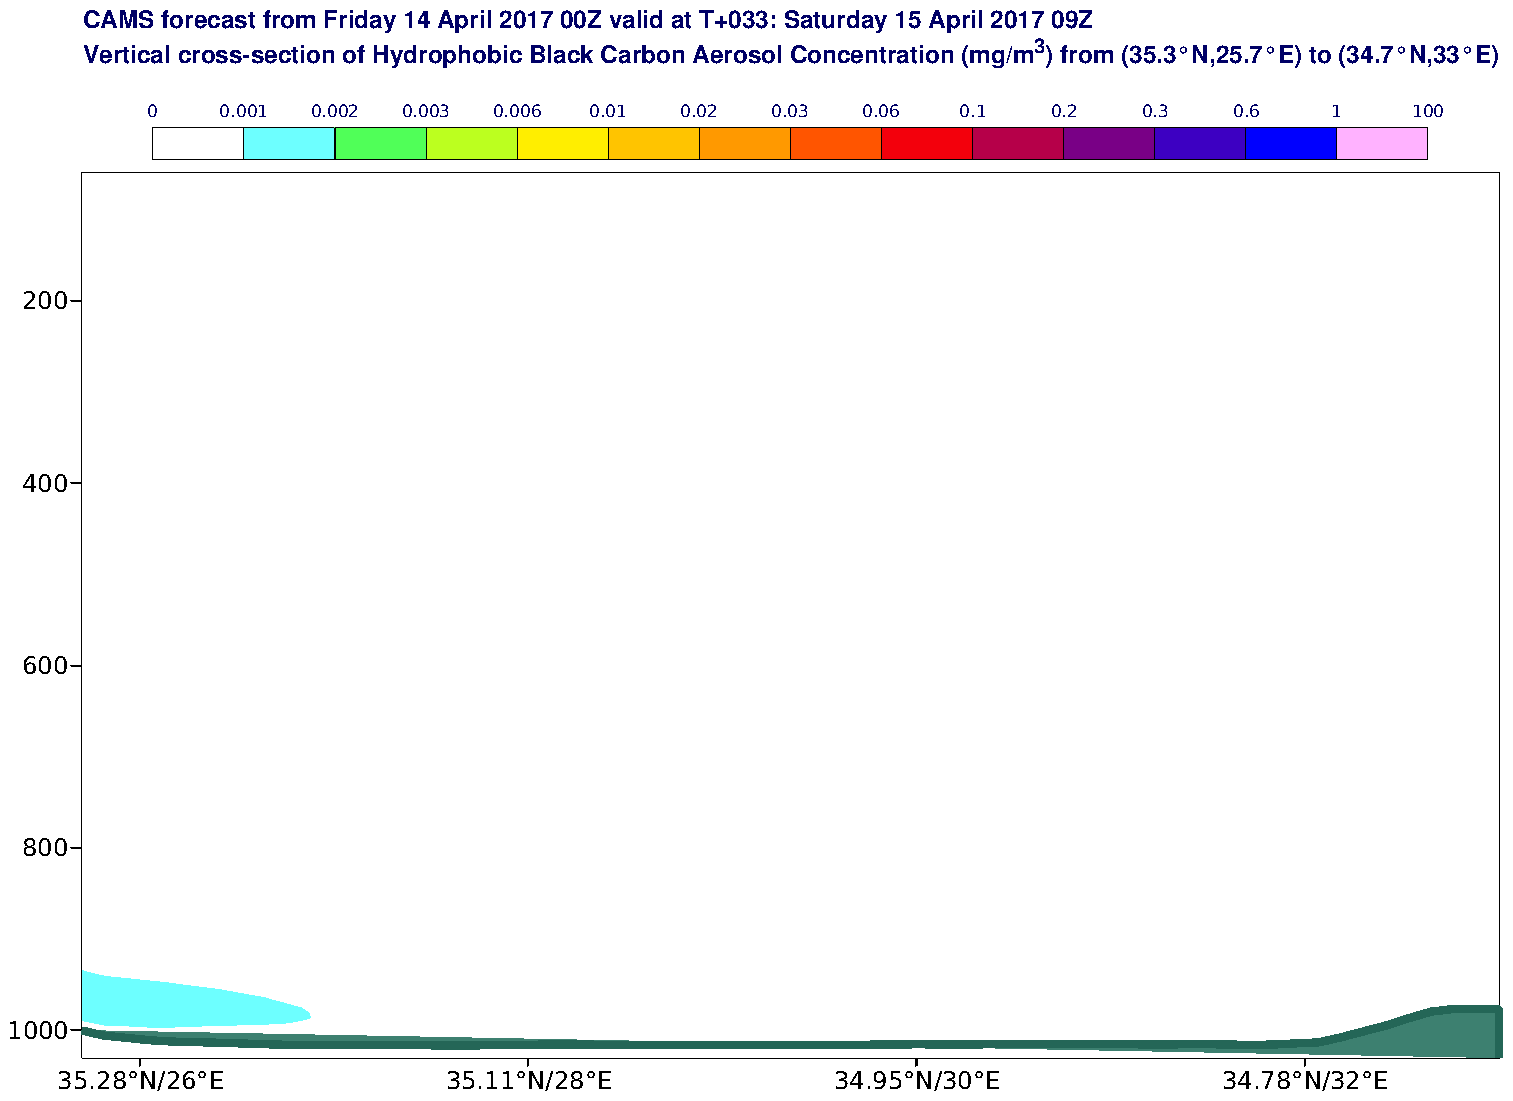 Vertical cross-section of Hydrophobic Black Carbon Aerosol Concentration (mg/m3) valid at T33 - 2017-04-15 09:00